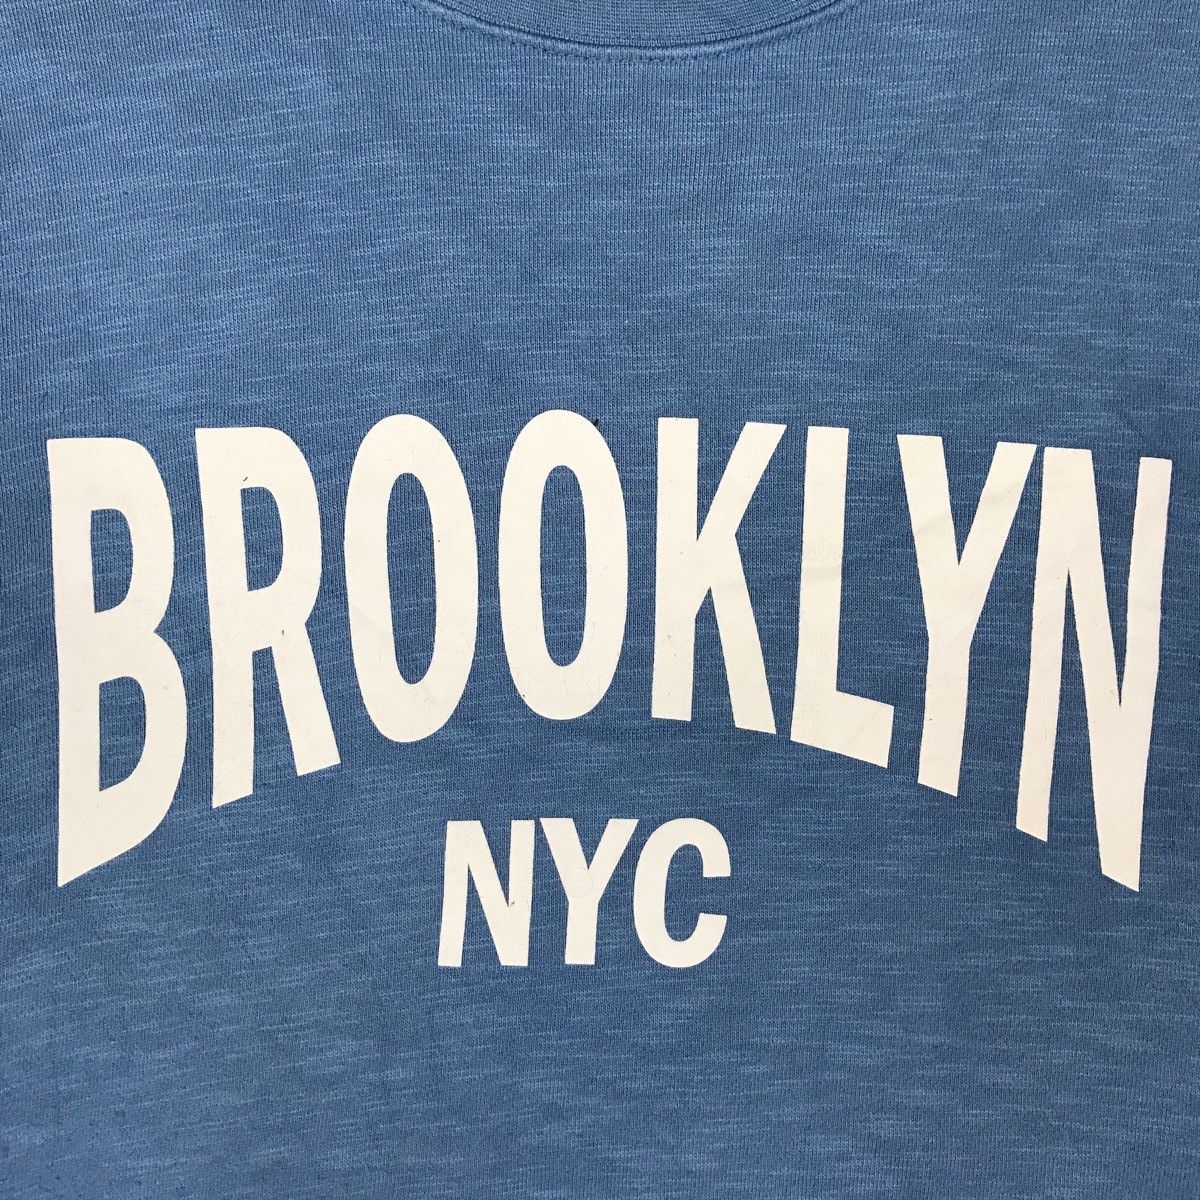 H&M Hennes and Mauritz H&M Brooklyn NYC Spell Out Pullover Size US L / EU 52-54 / 3 - 3 Thumbnail